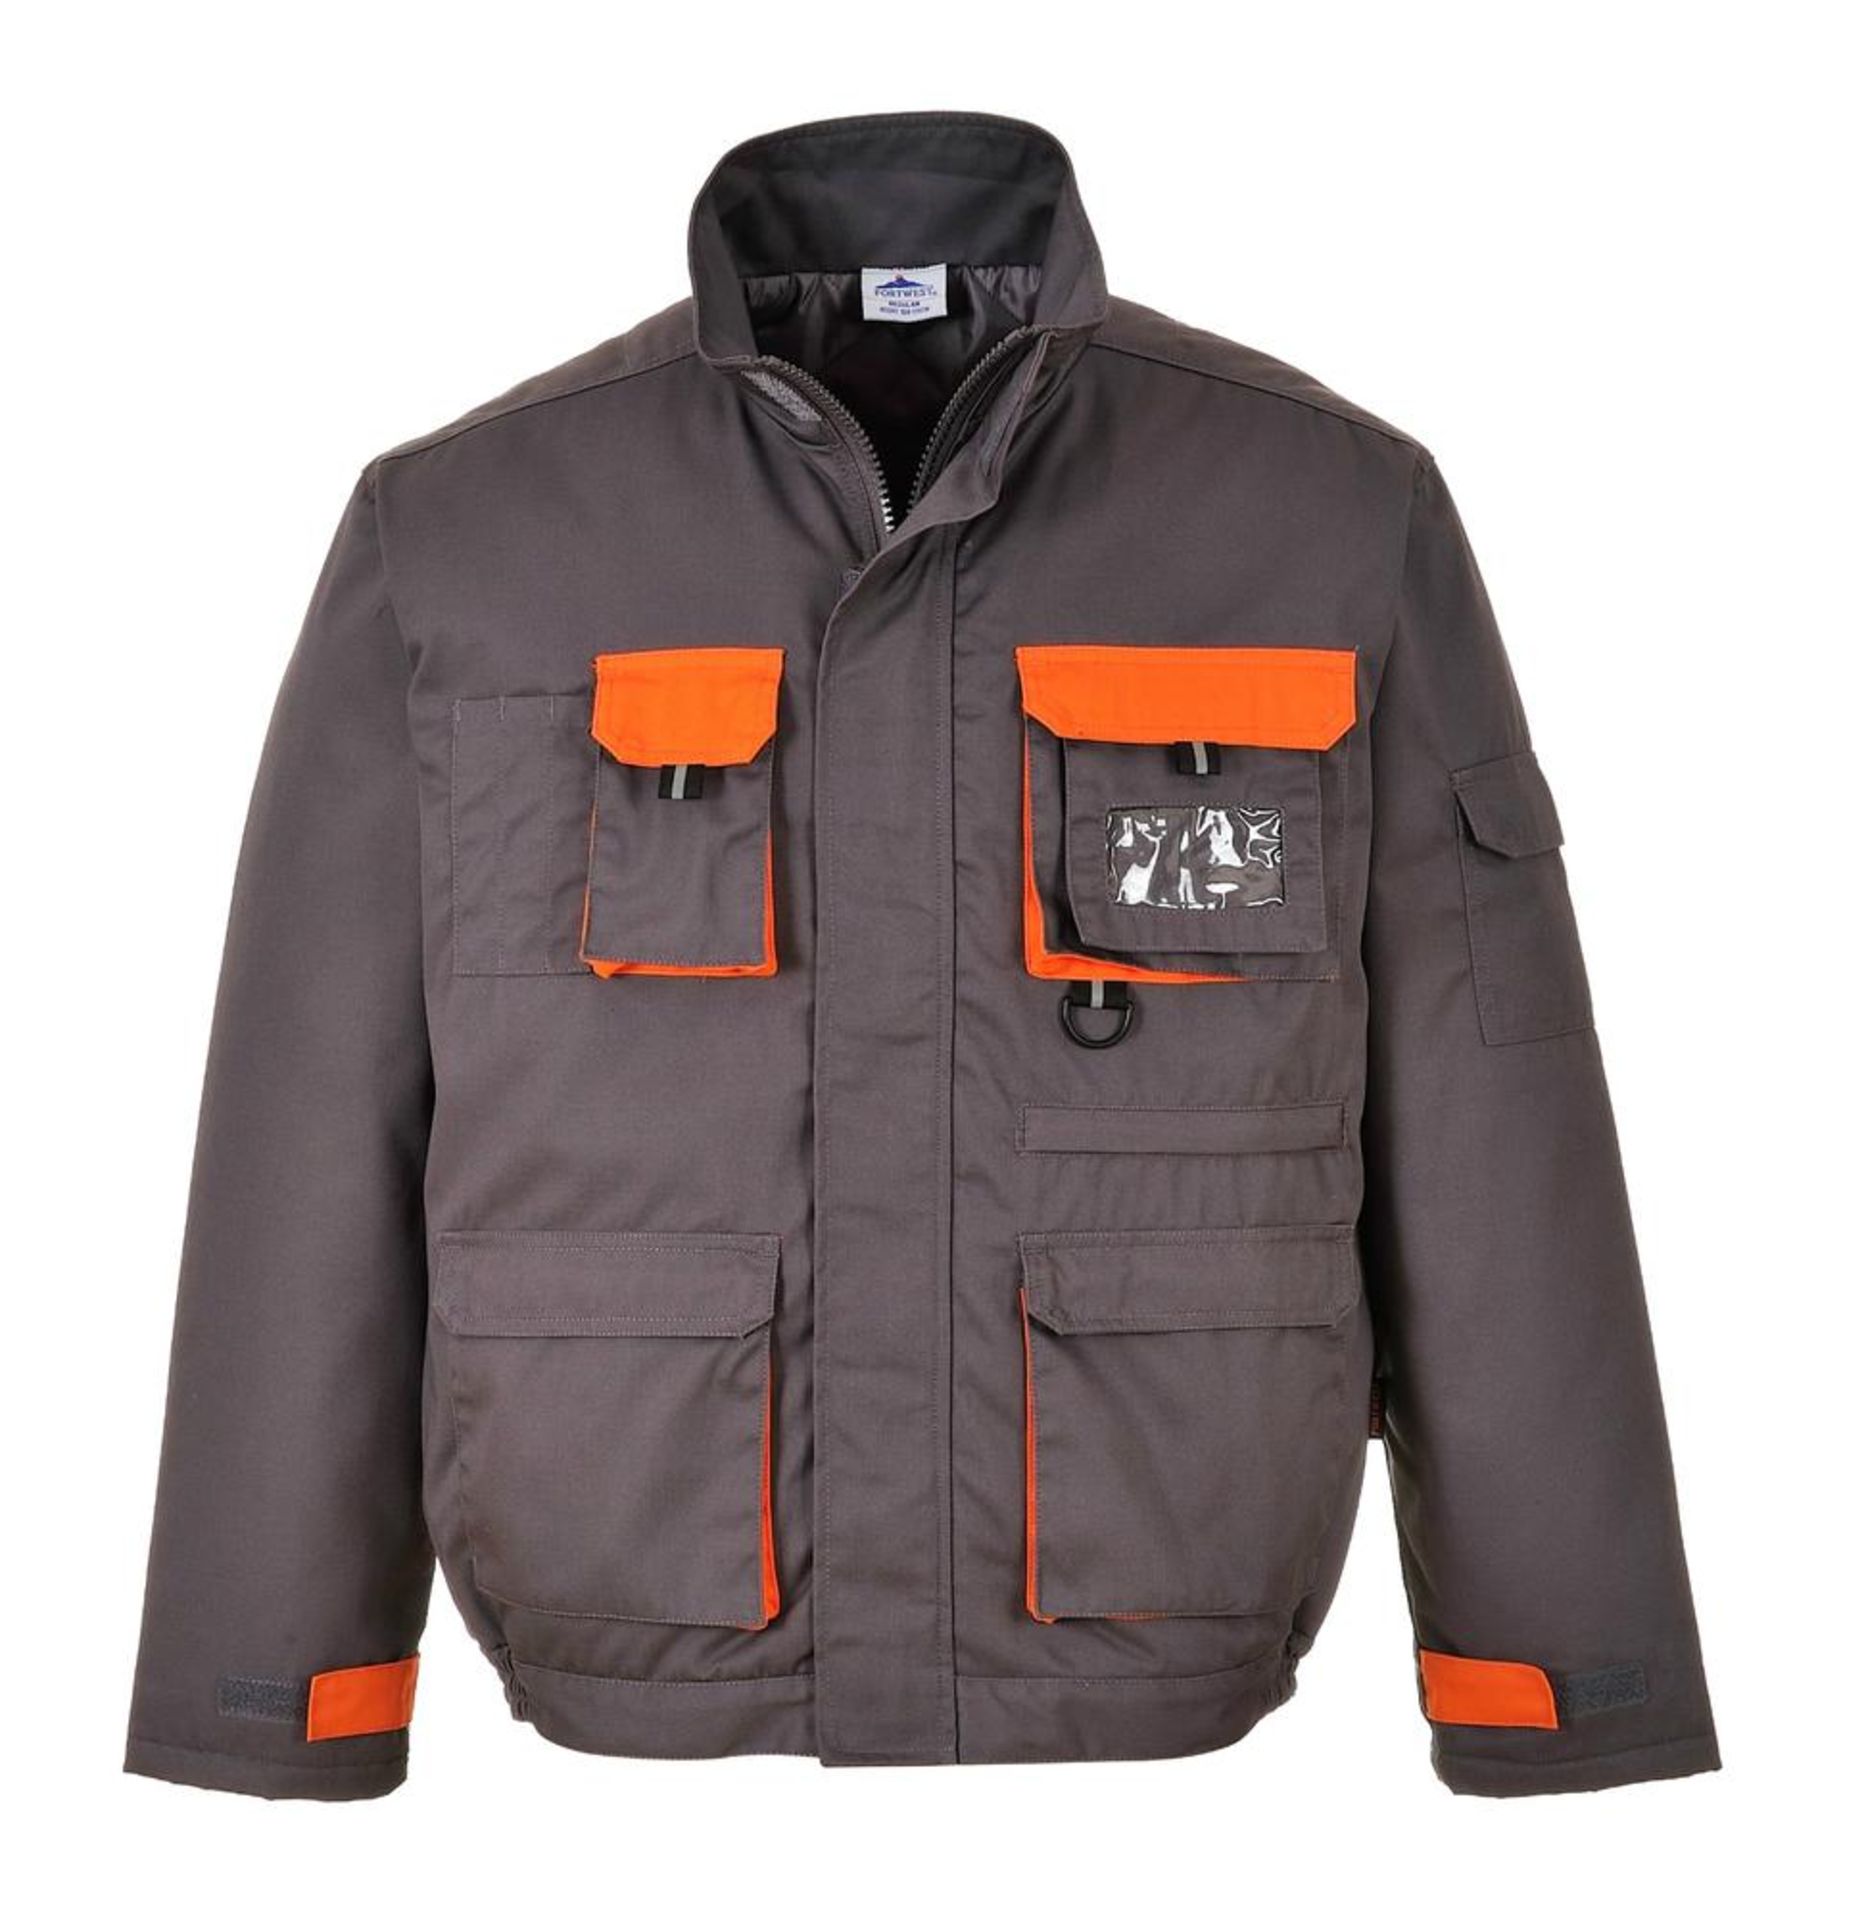 BRAND NEW PORTWEST TX18 Texo Contrast Lined Jacket Grey SIZE (S). RRP £45. (R19-3). (TX18GRRS). This